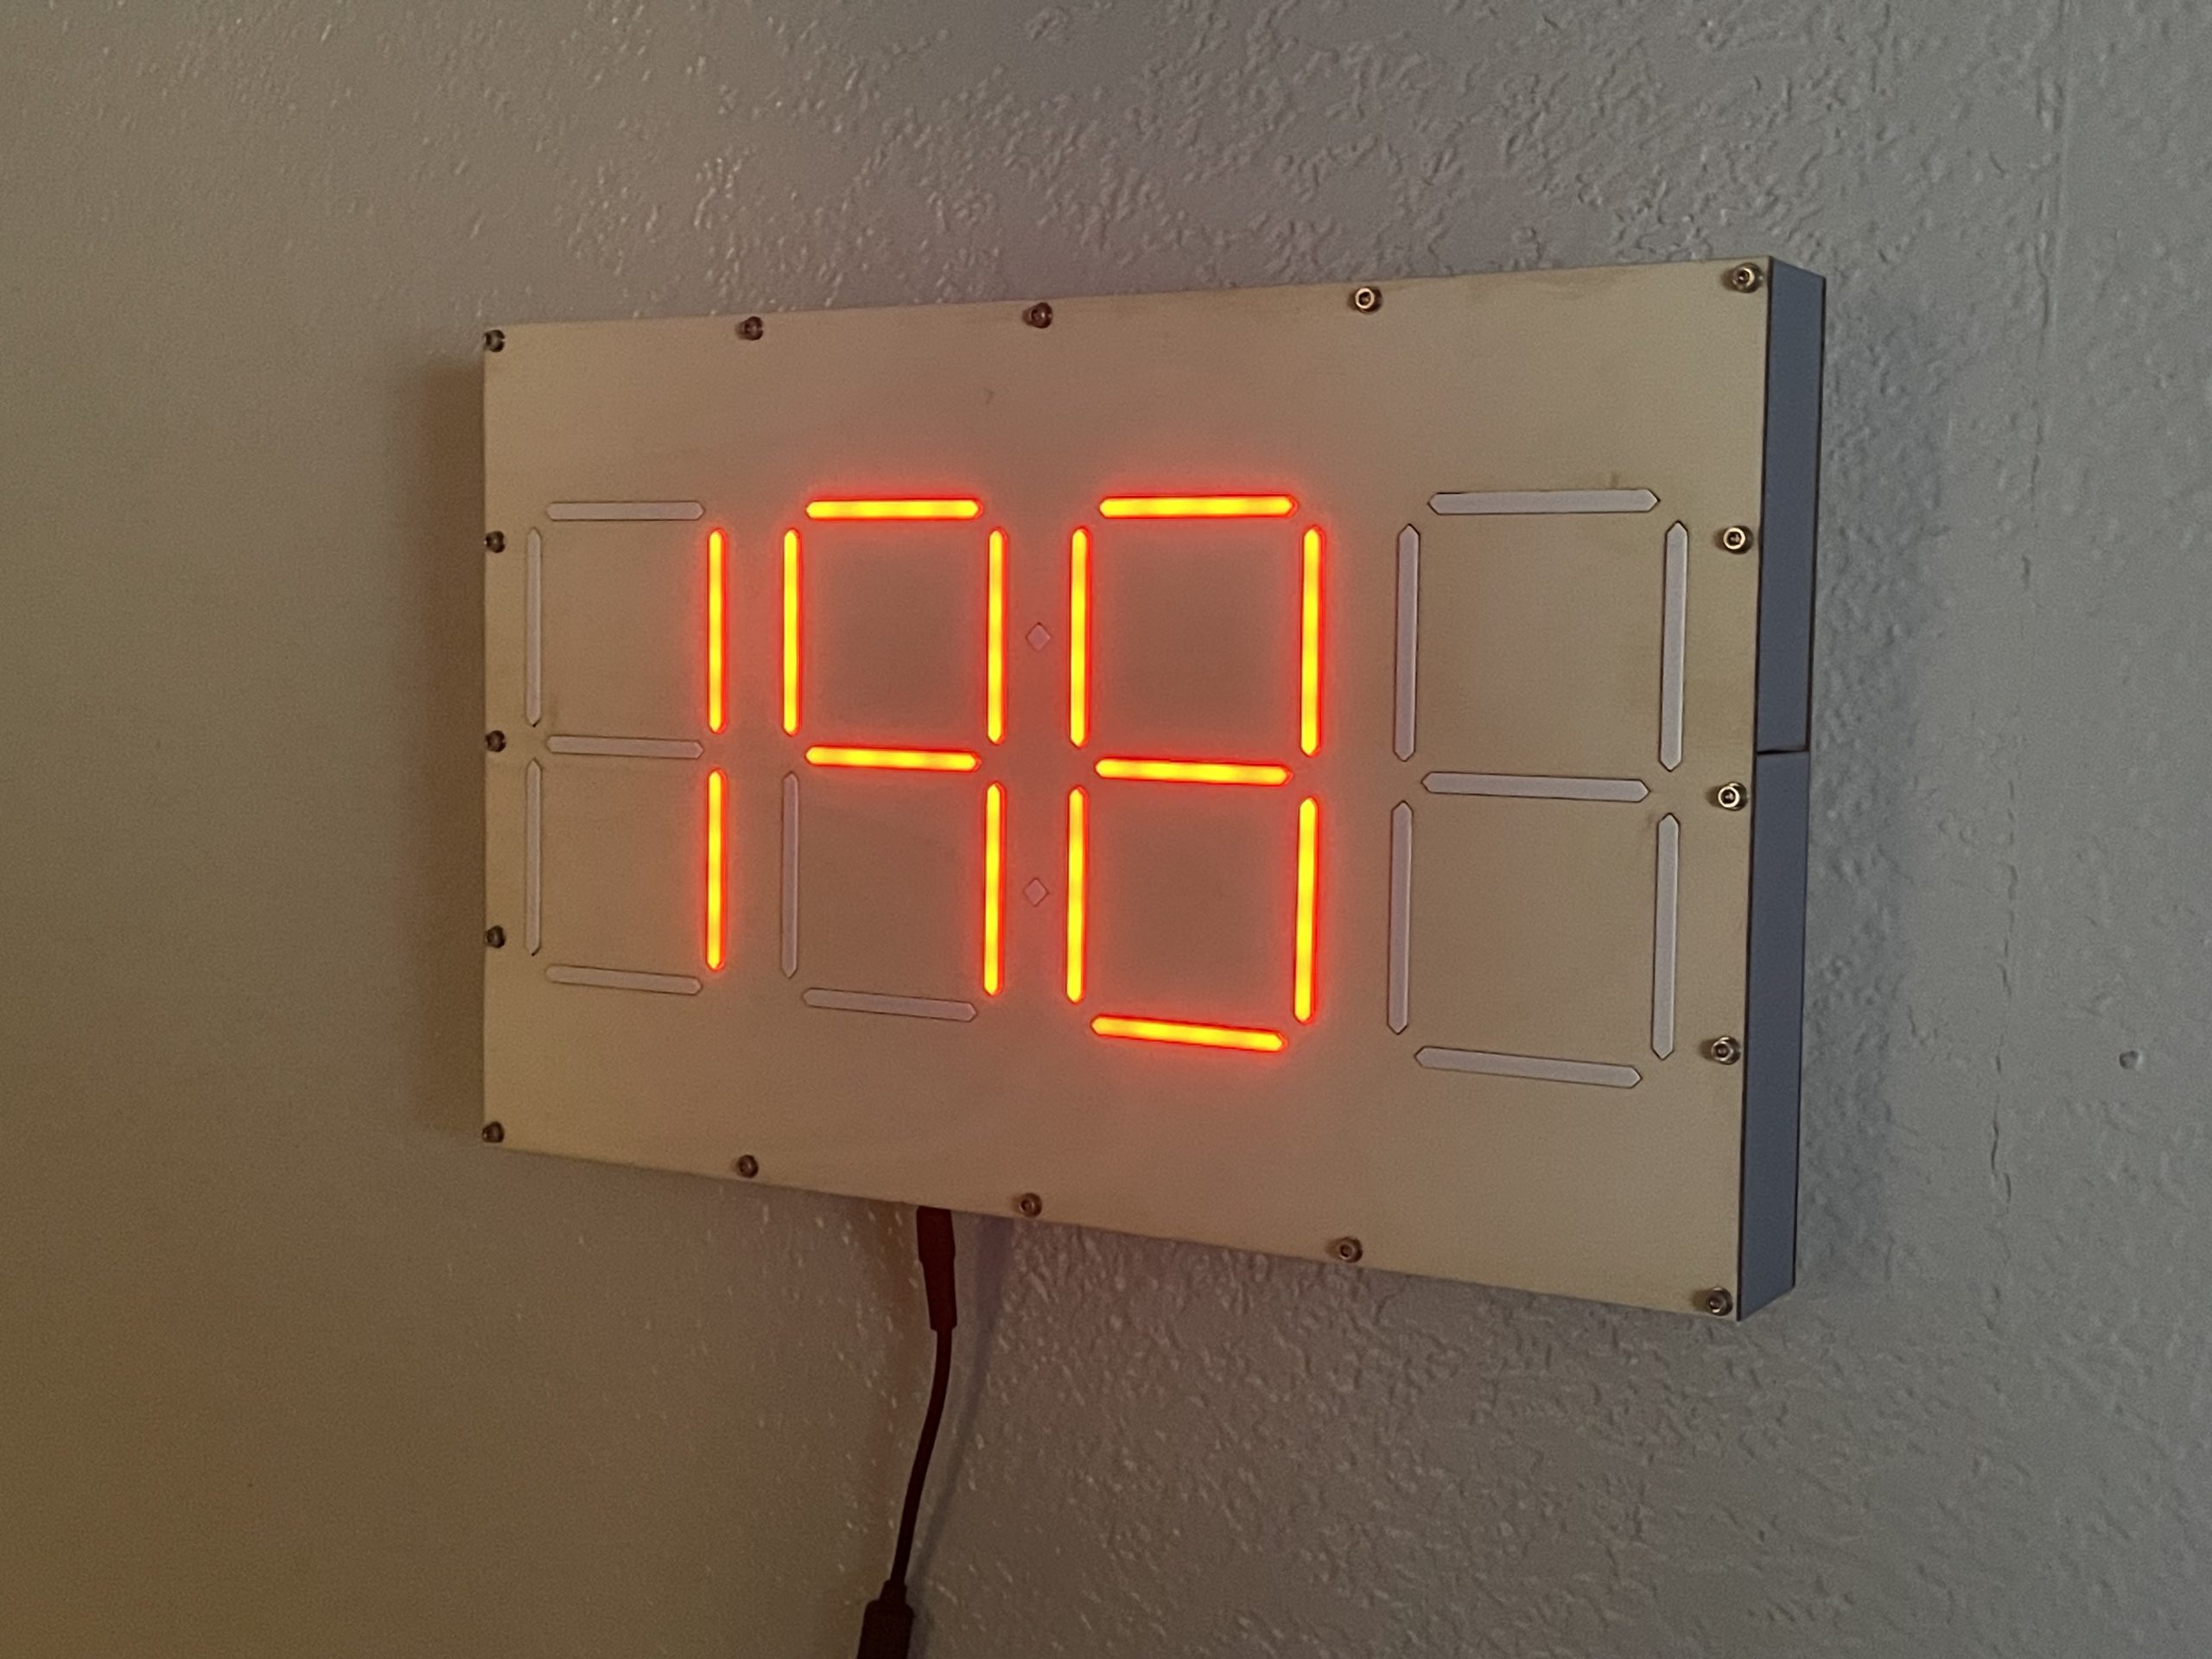 SubscriberBoard – a Home Assistant-connected oversized 7-segment display